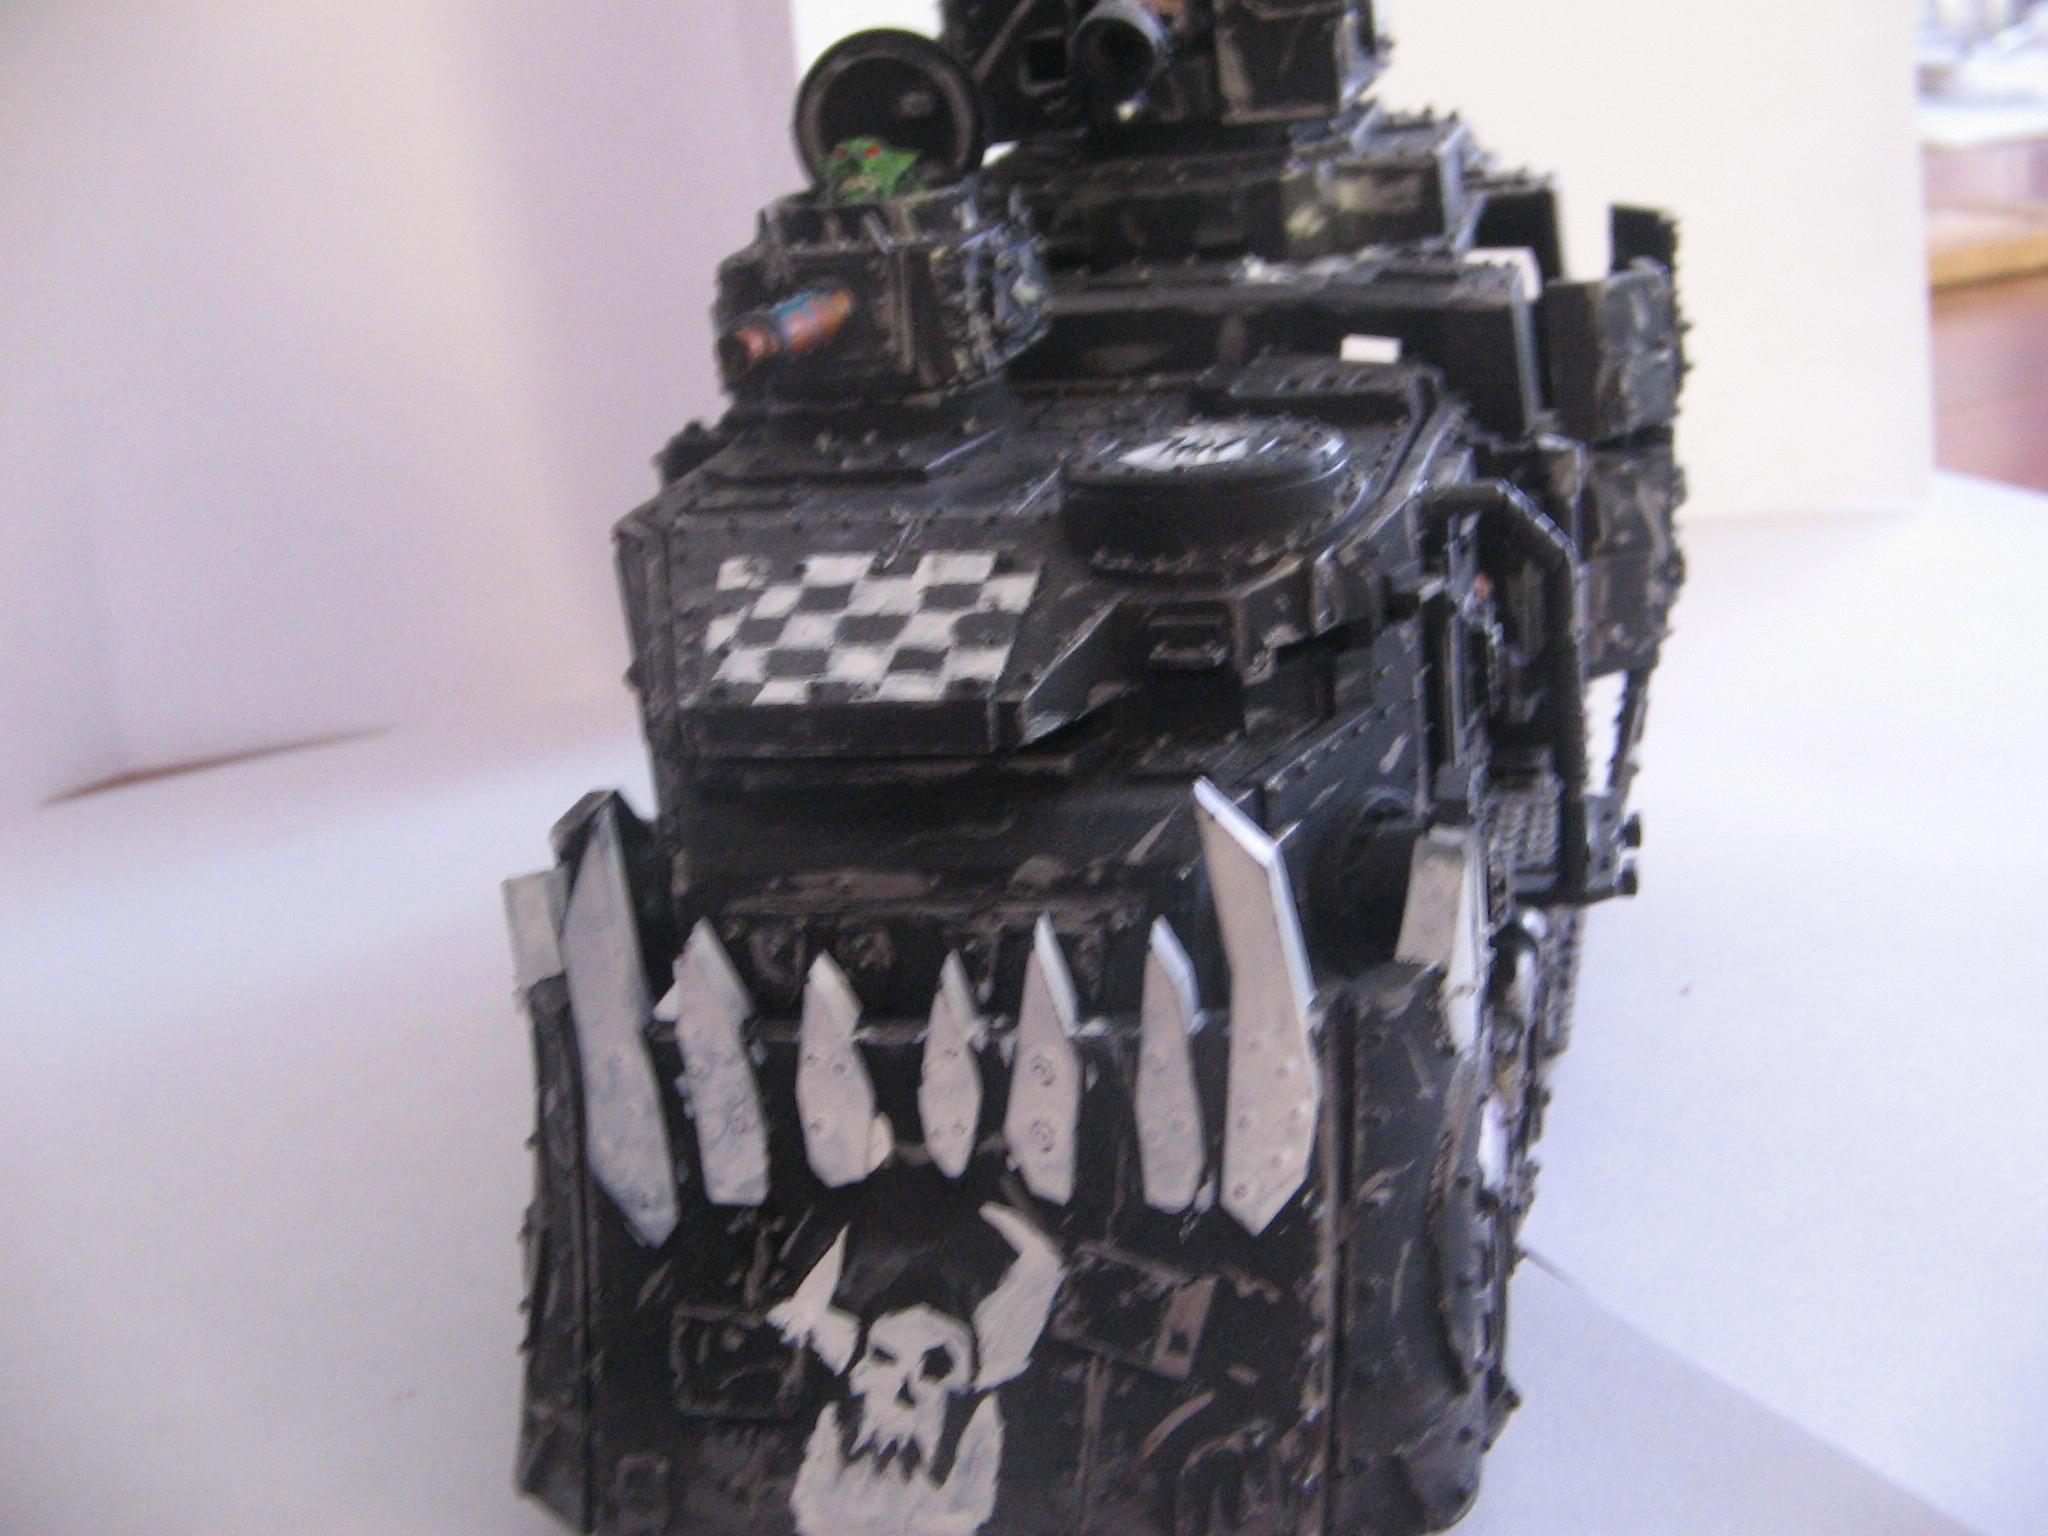 Orks, wagon front